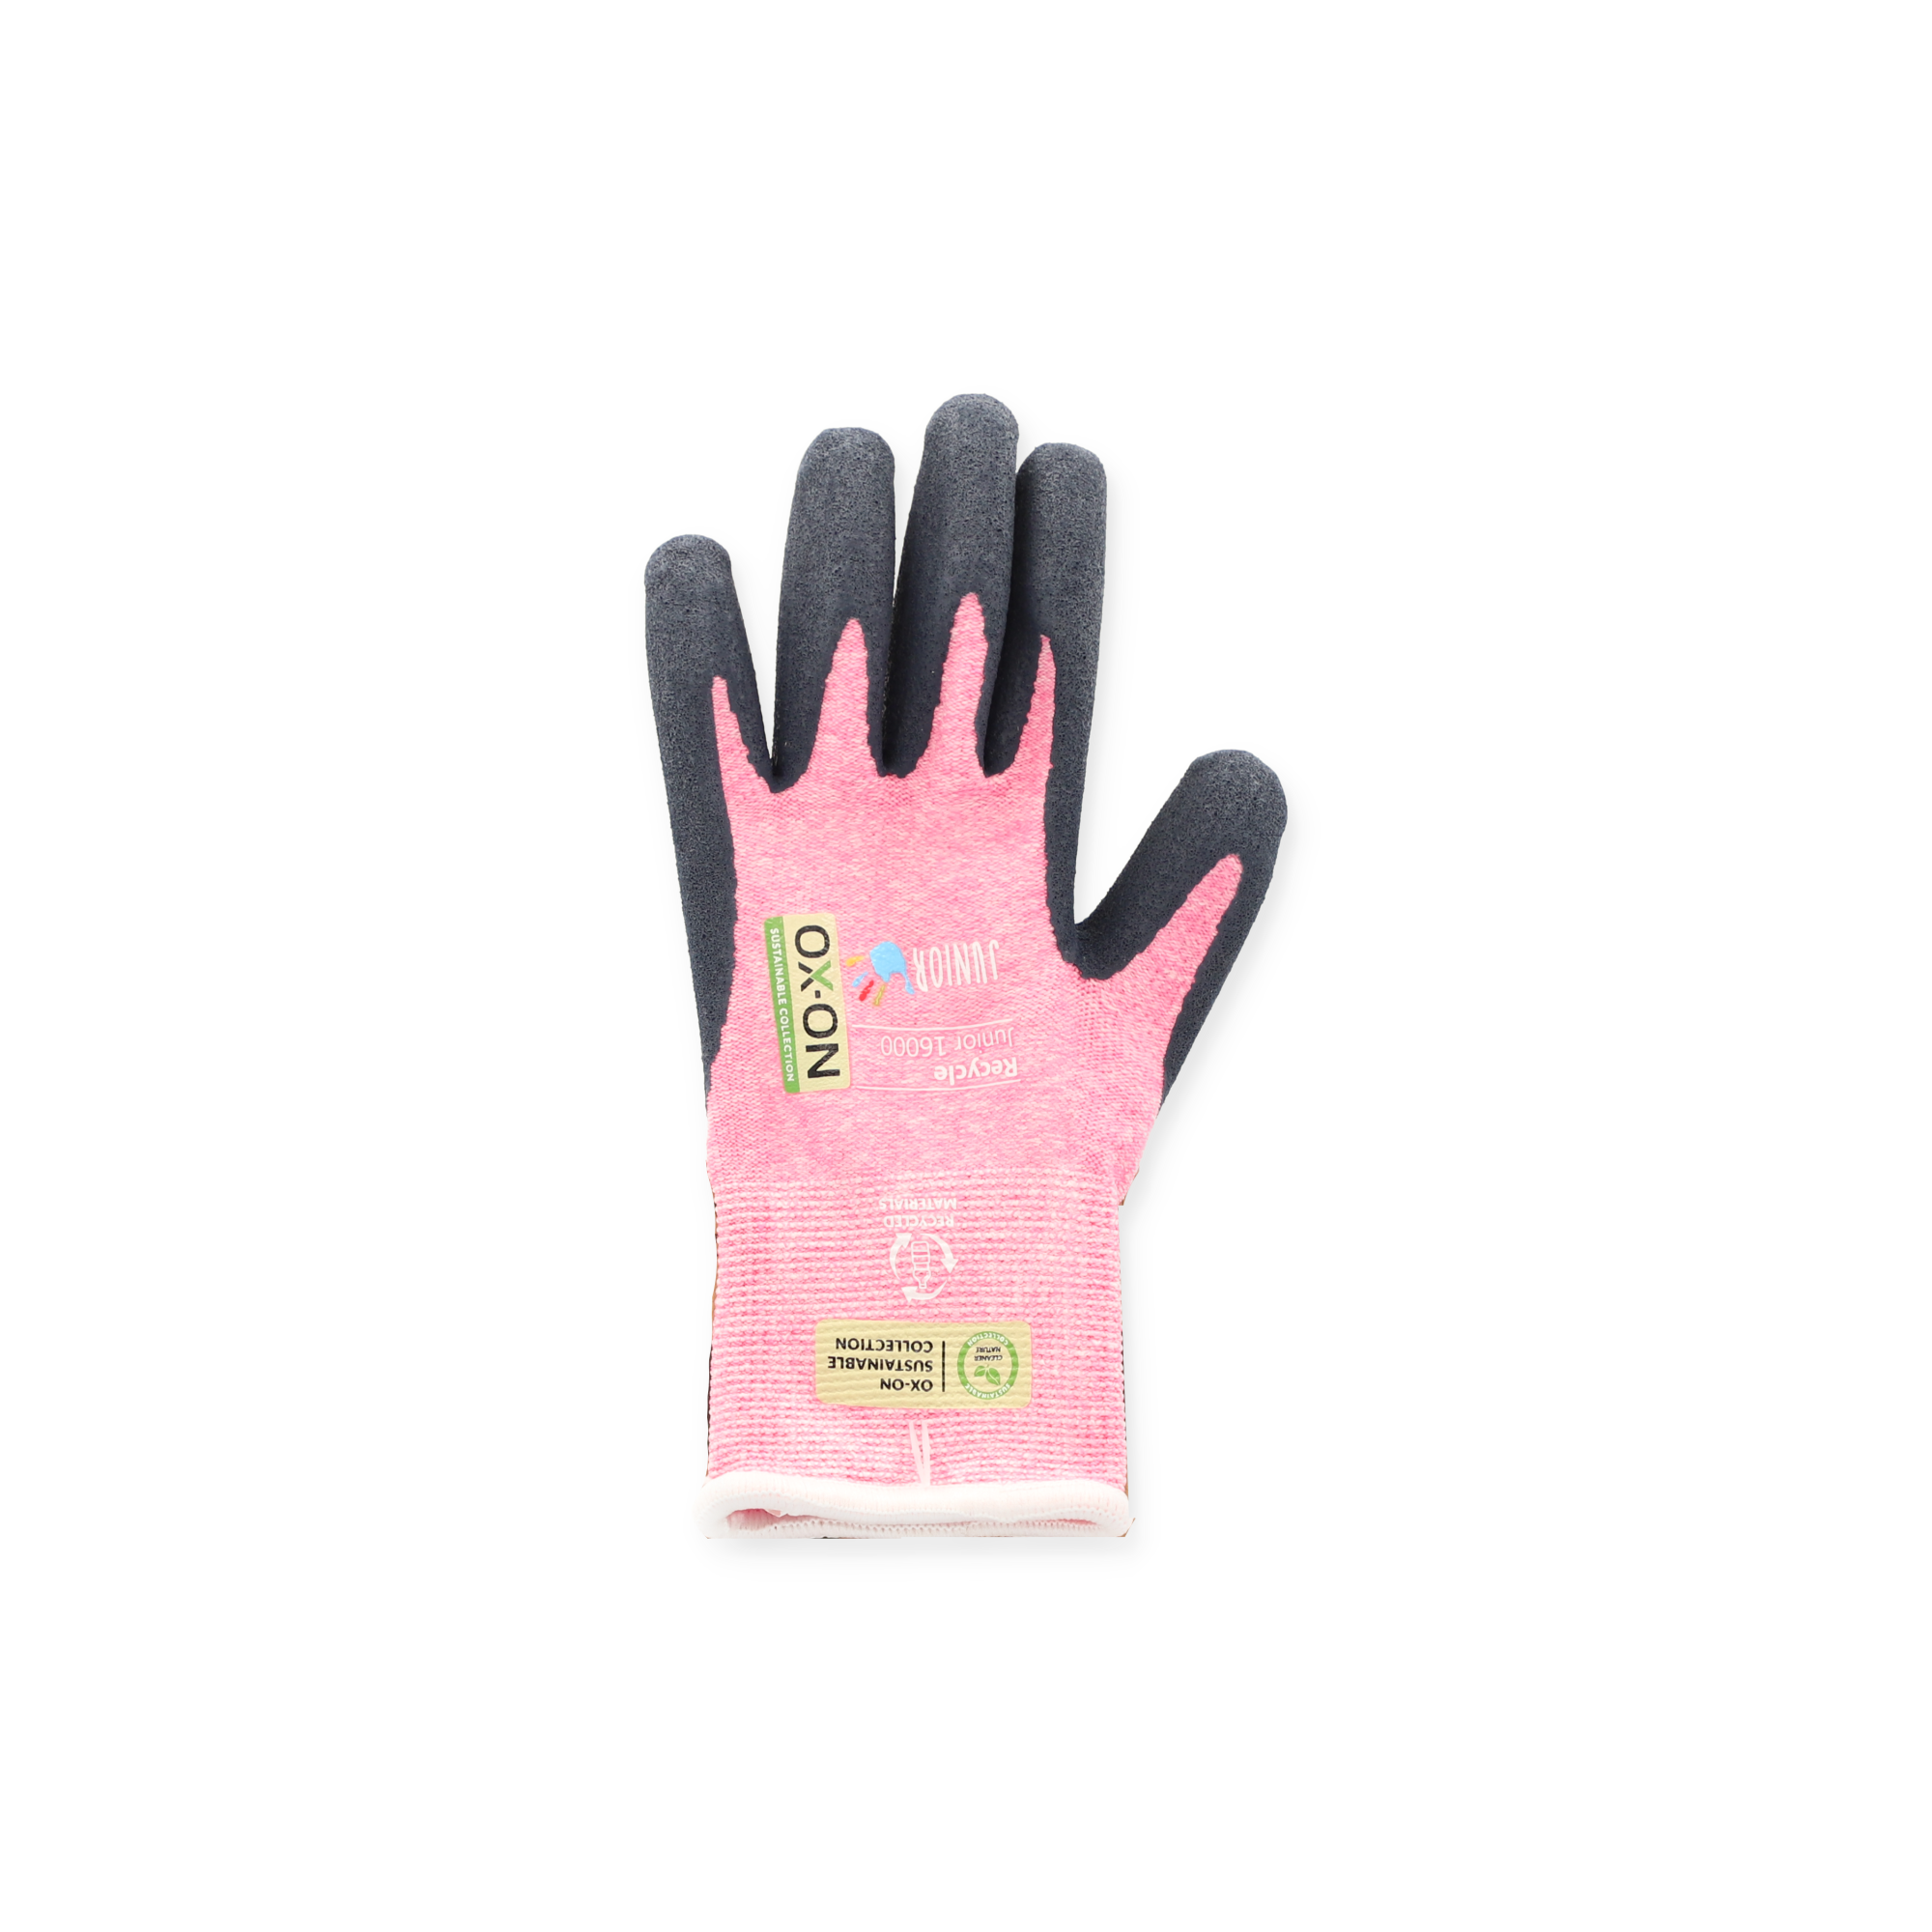 Handschuhe 'Junior 16000' pink 4-6 Jahre + product picture